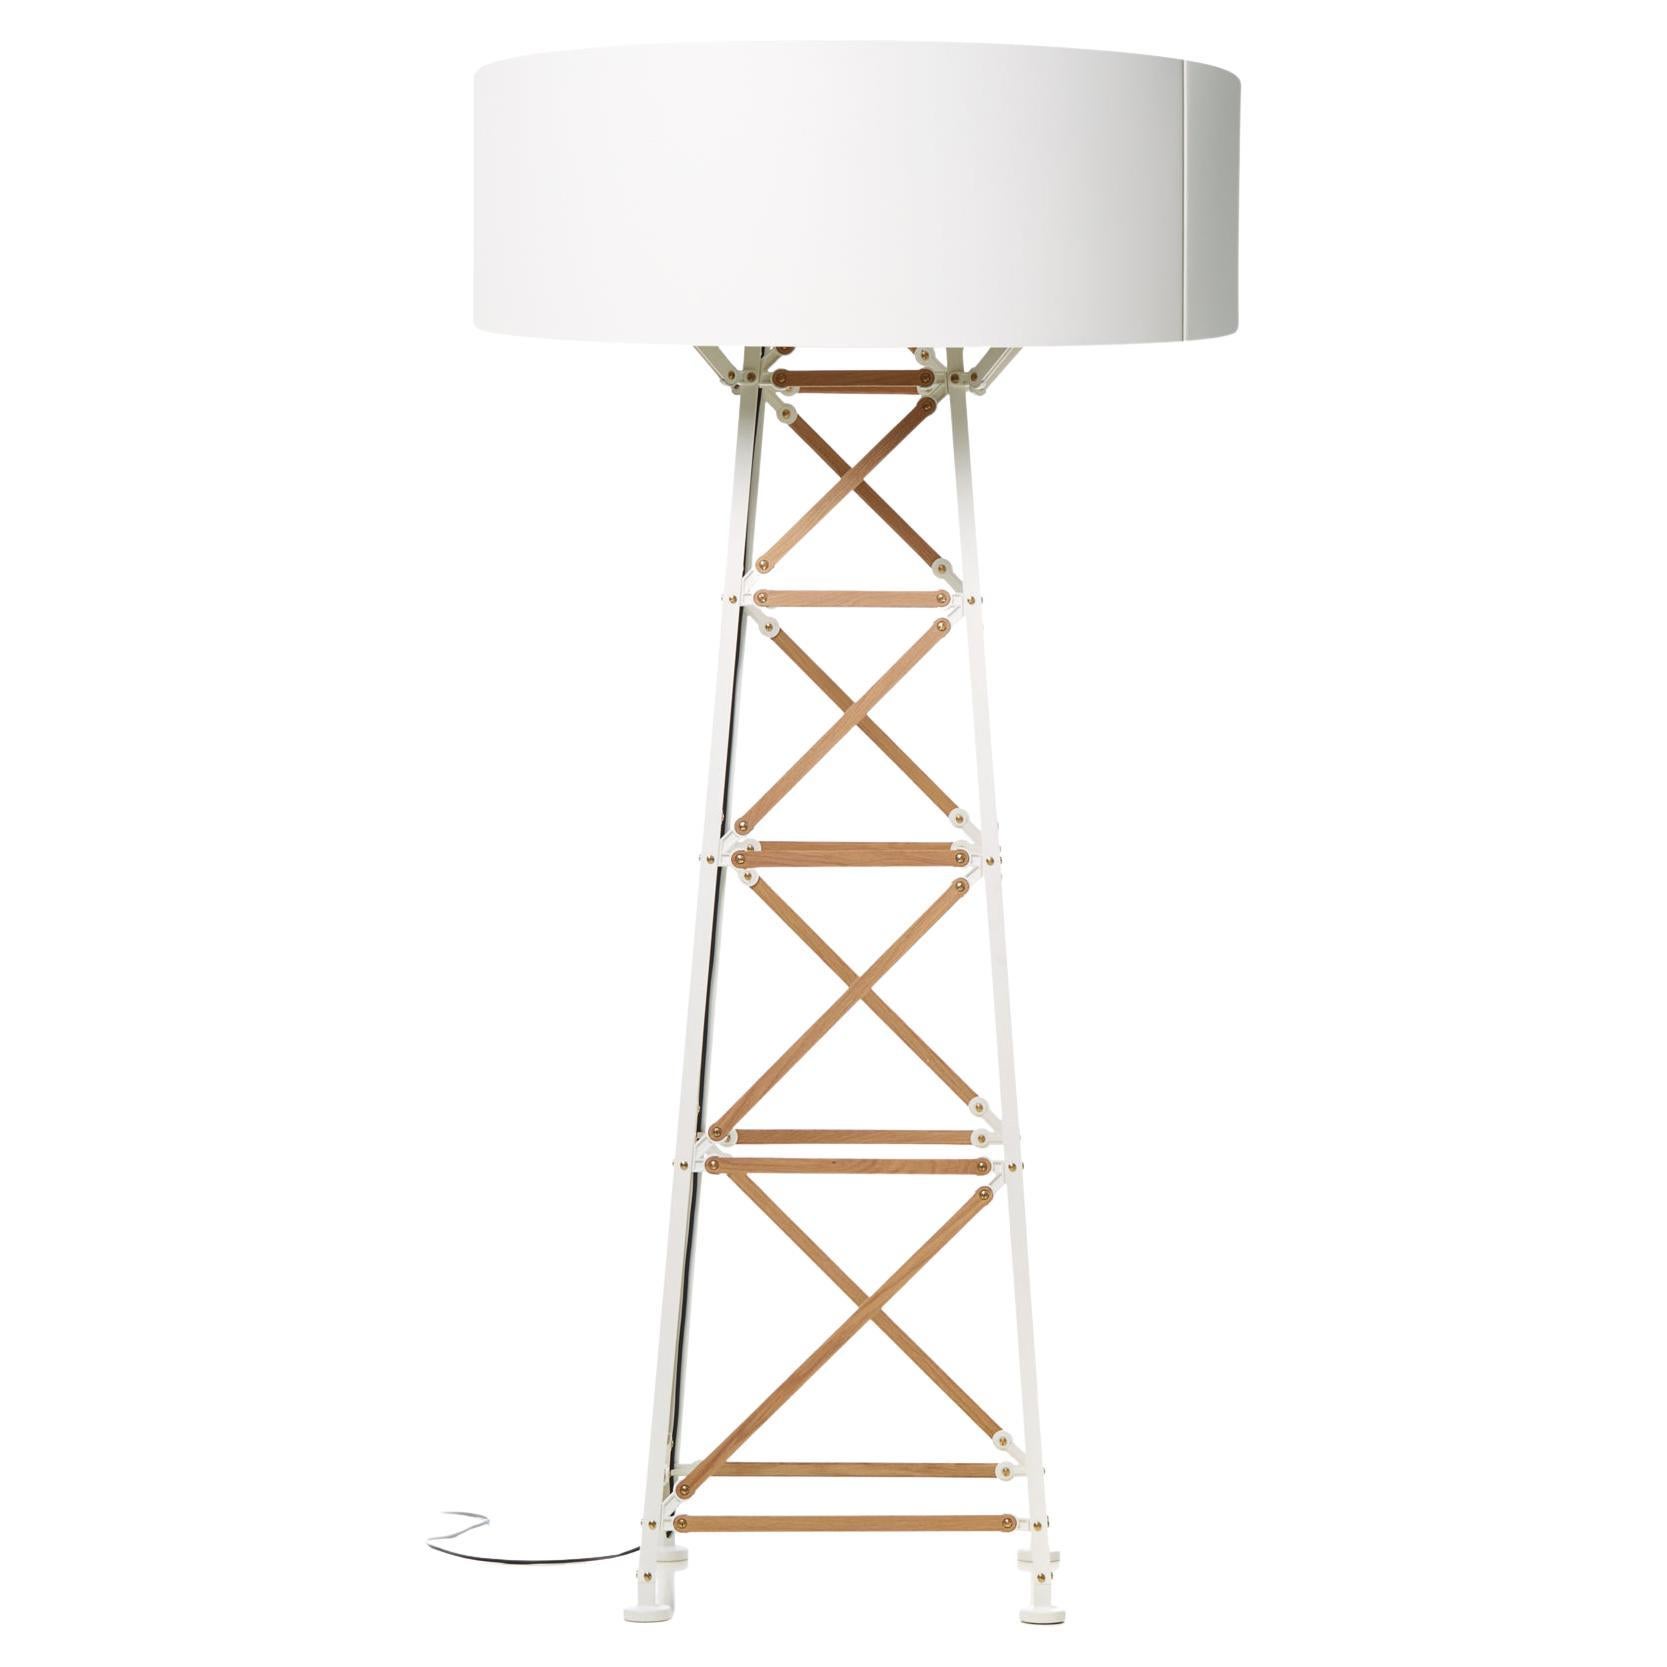 Moooi Construction Large White Wood Floor Lamp in Aluminum with Steel Shade